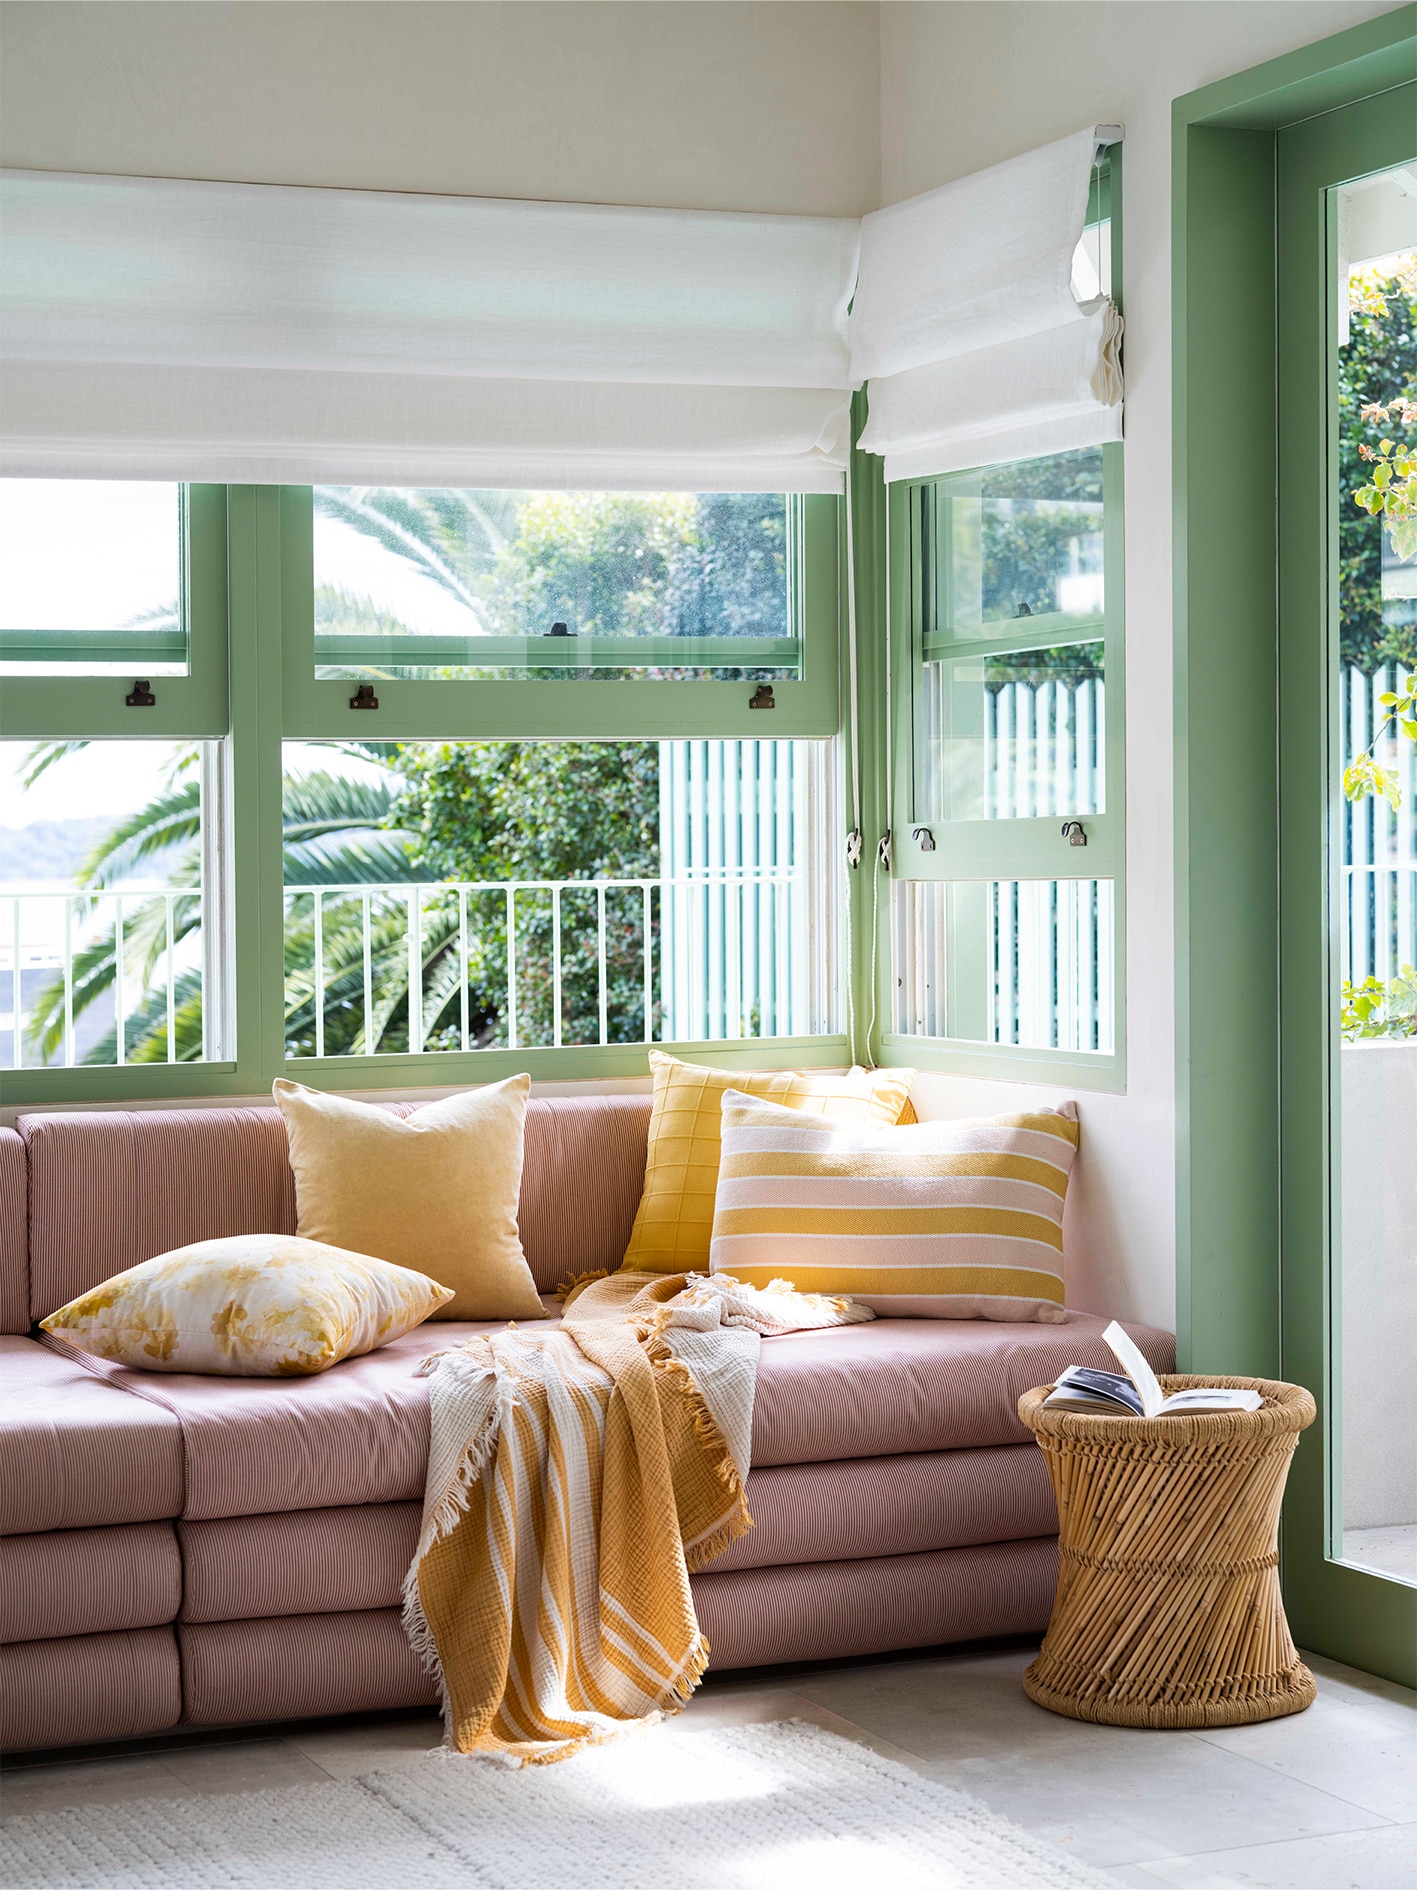 pink couch layered with gold and yellow cushions and throws. windows in abckground with green awnings. biege floor, on it sits a wooden stool/feature side table.